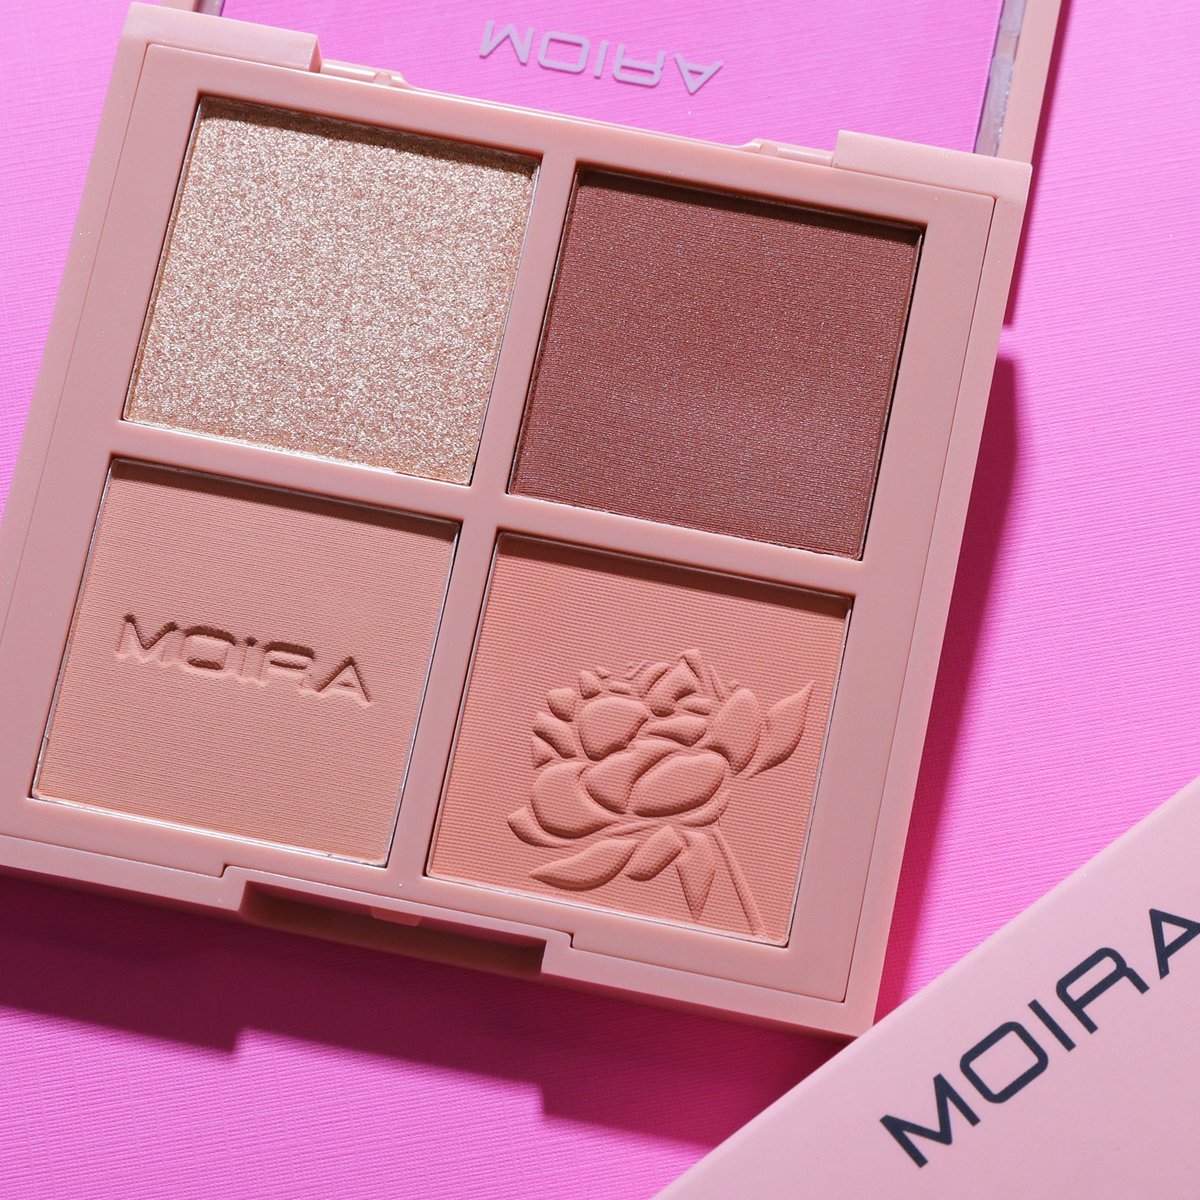 Moira You Had Me at Makeup Palette